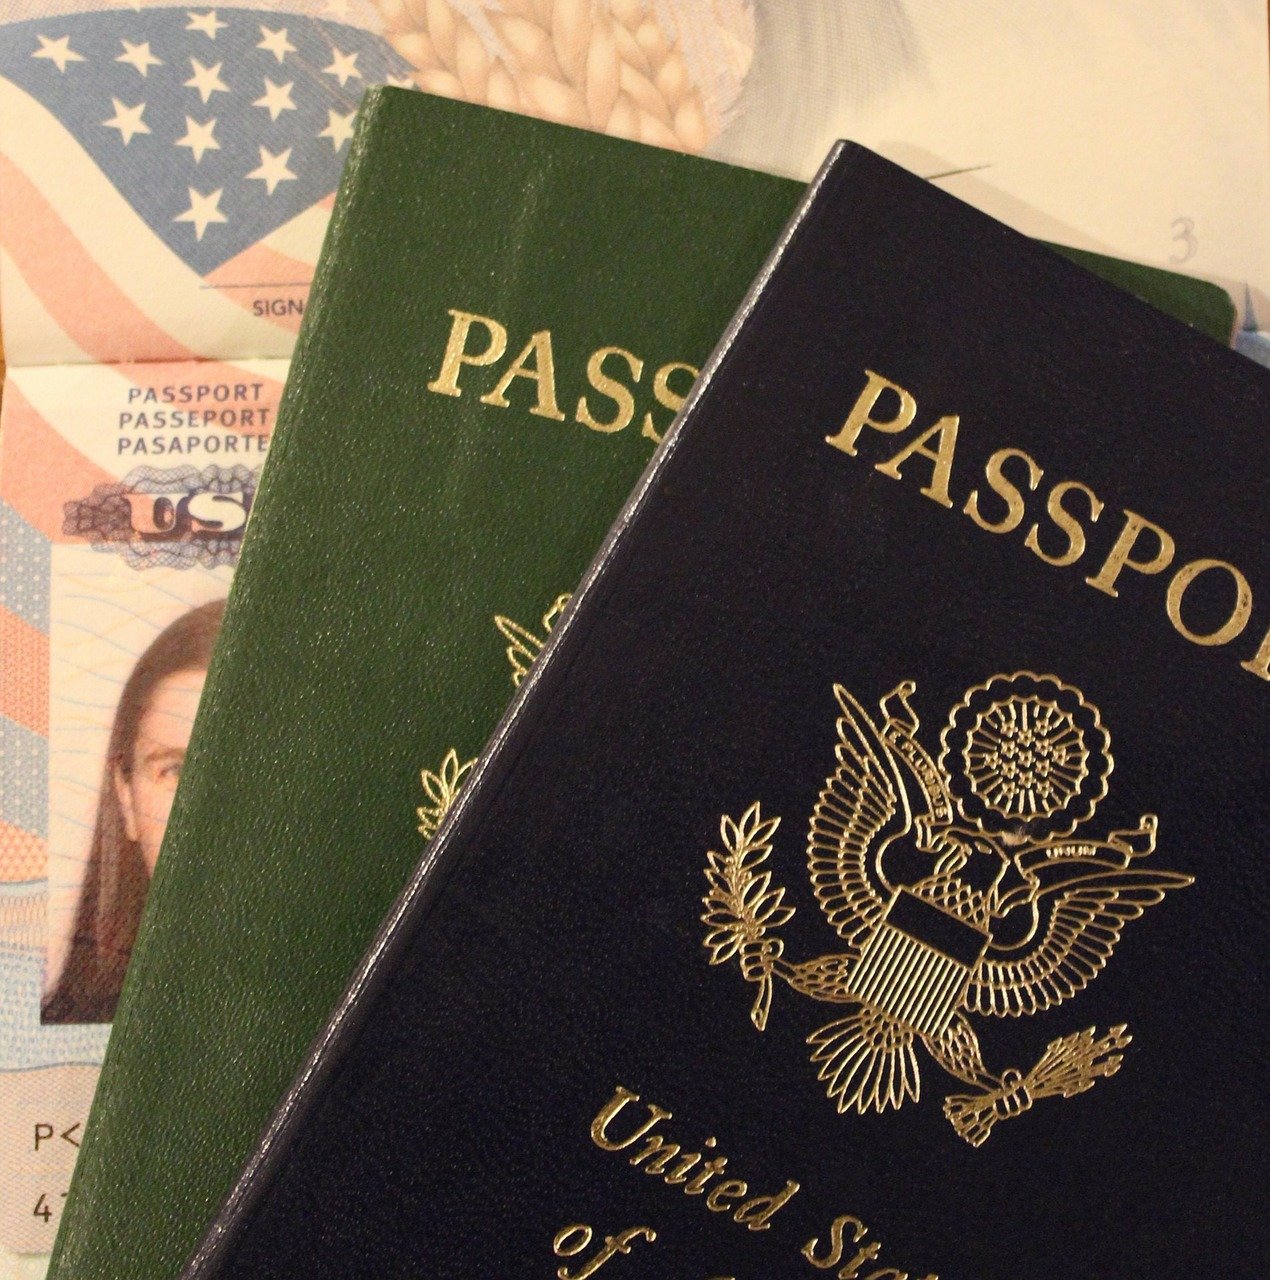 Two passports sit on top of an open passport